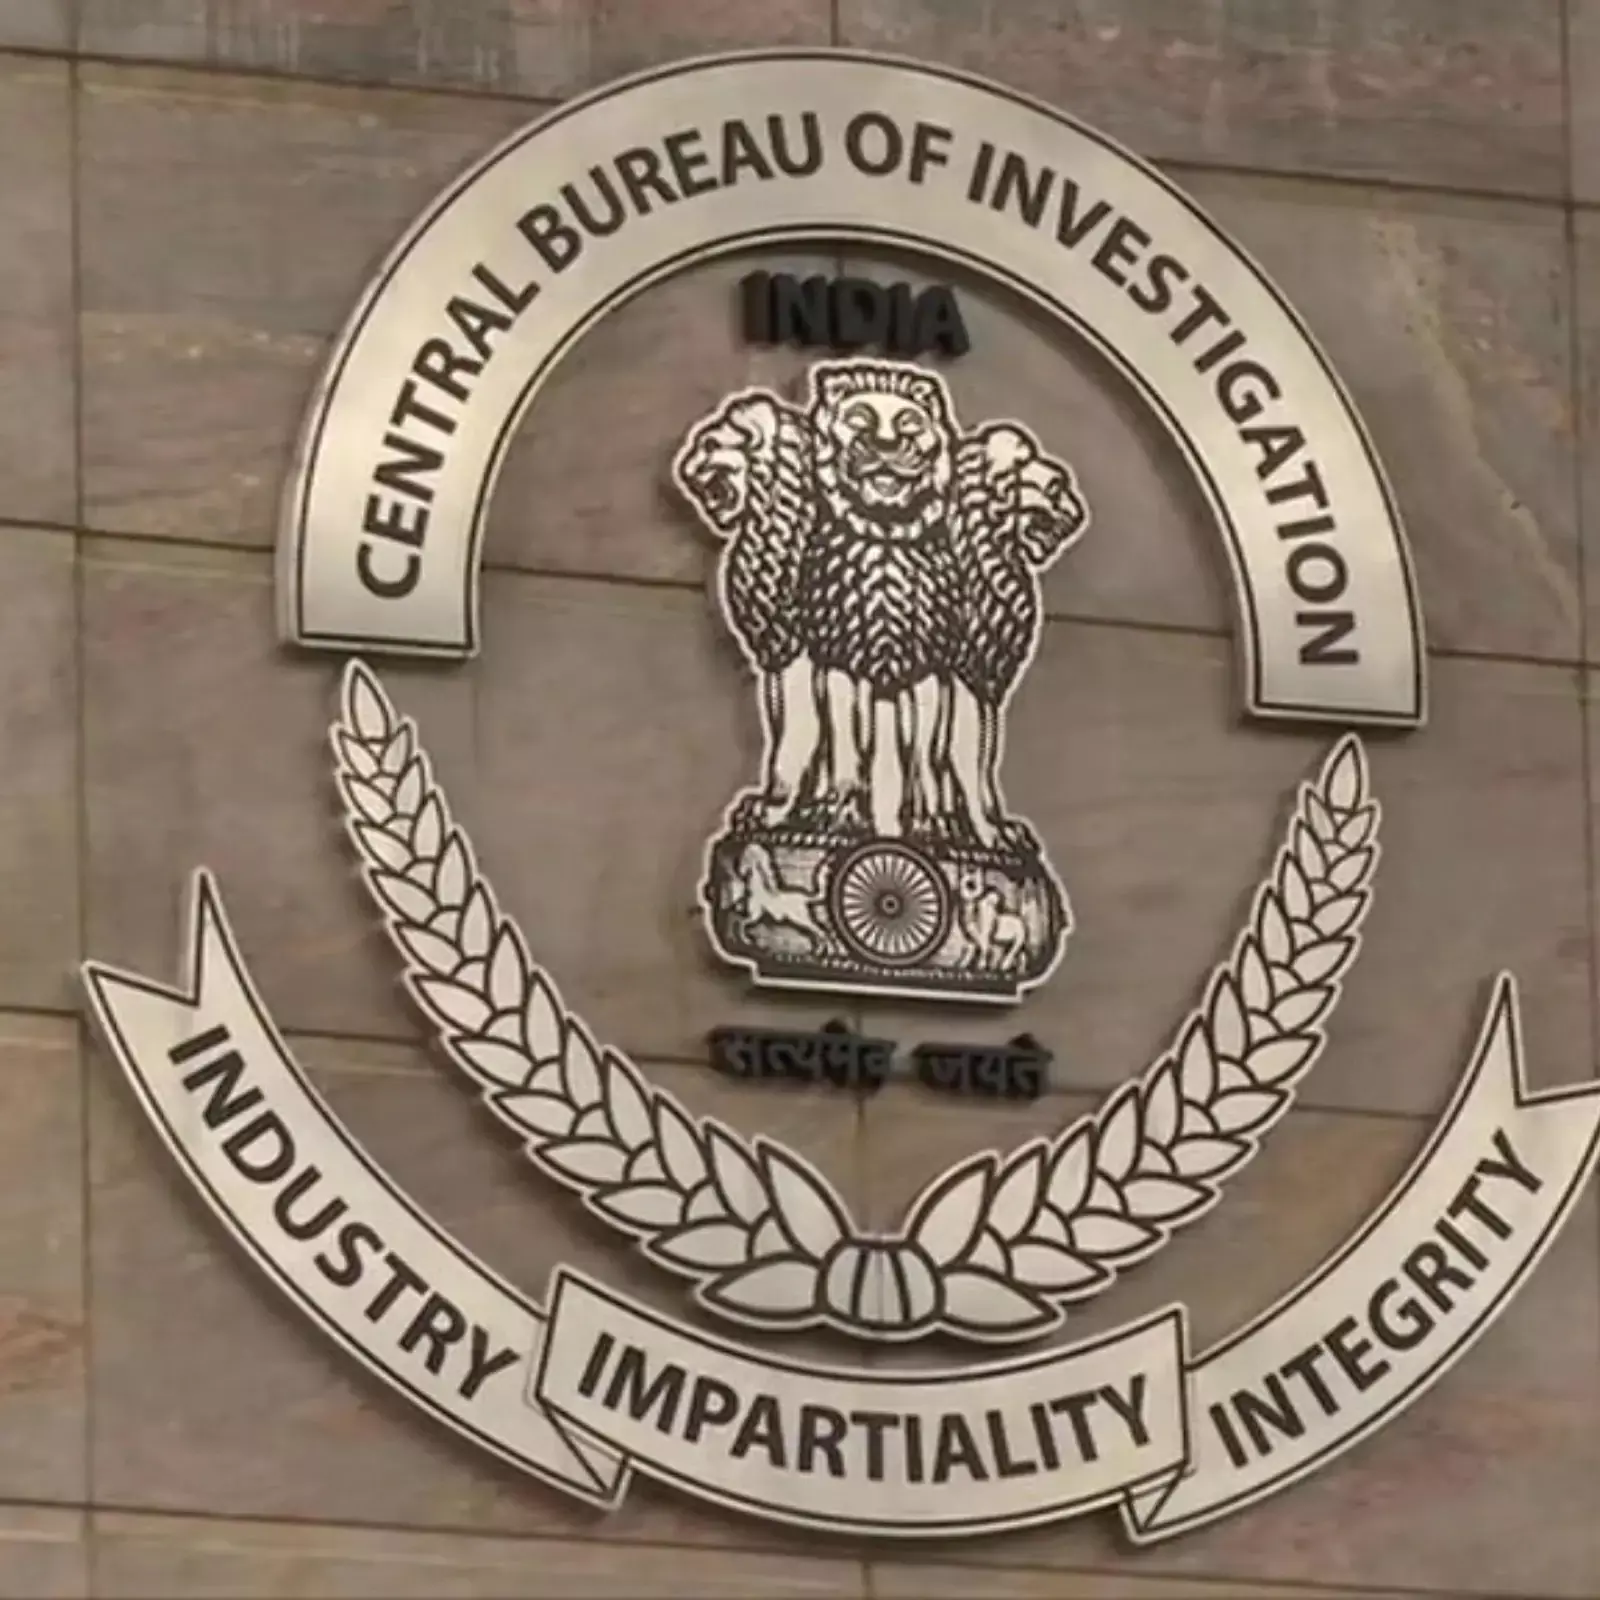 Bridge and Roof Company chairmans executive secy, 6 others, arrested by CBI in Rs 20L bribe case